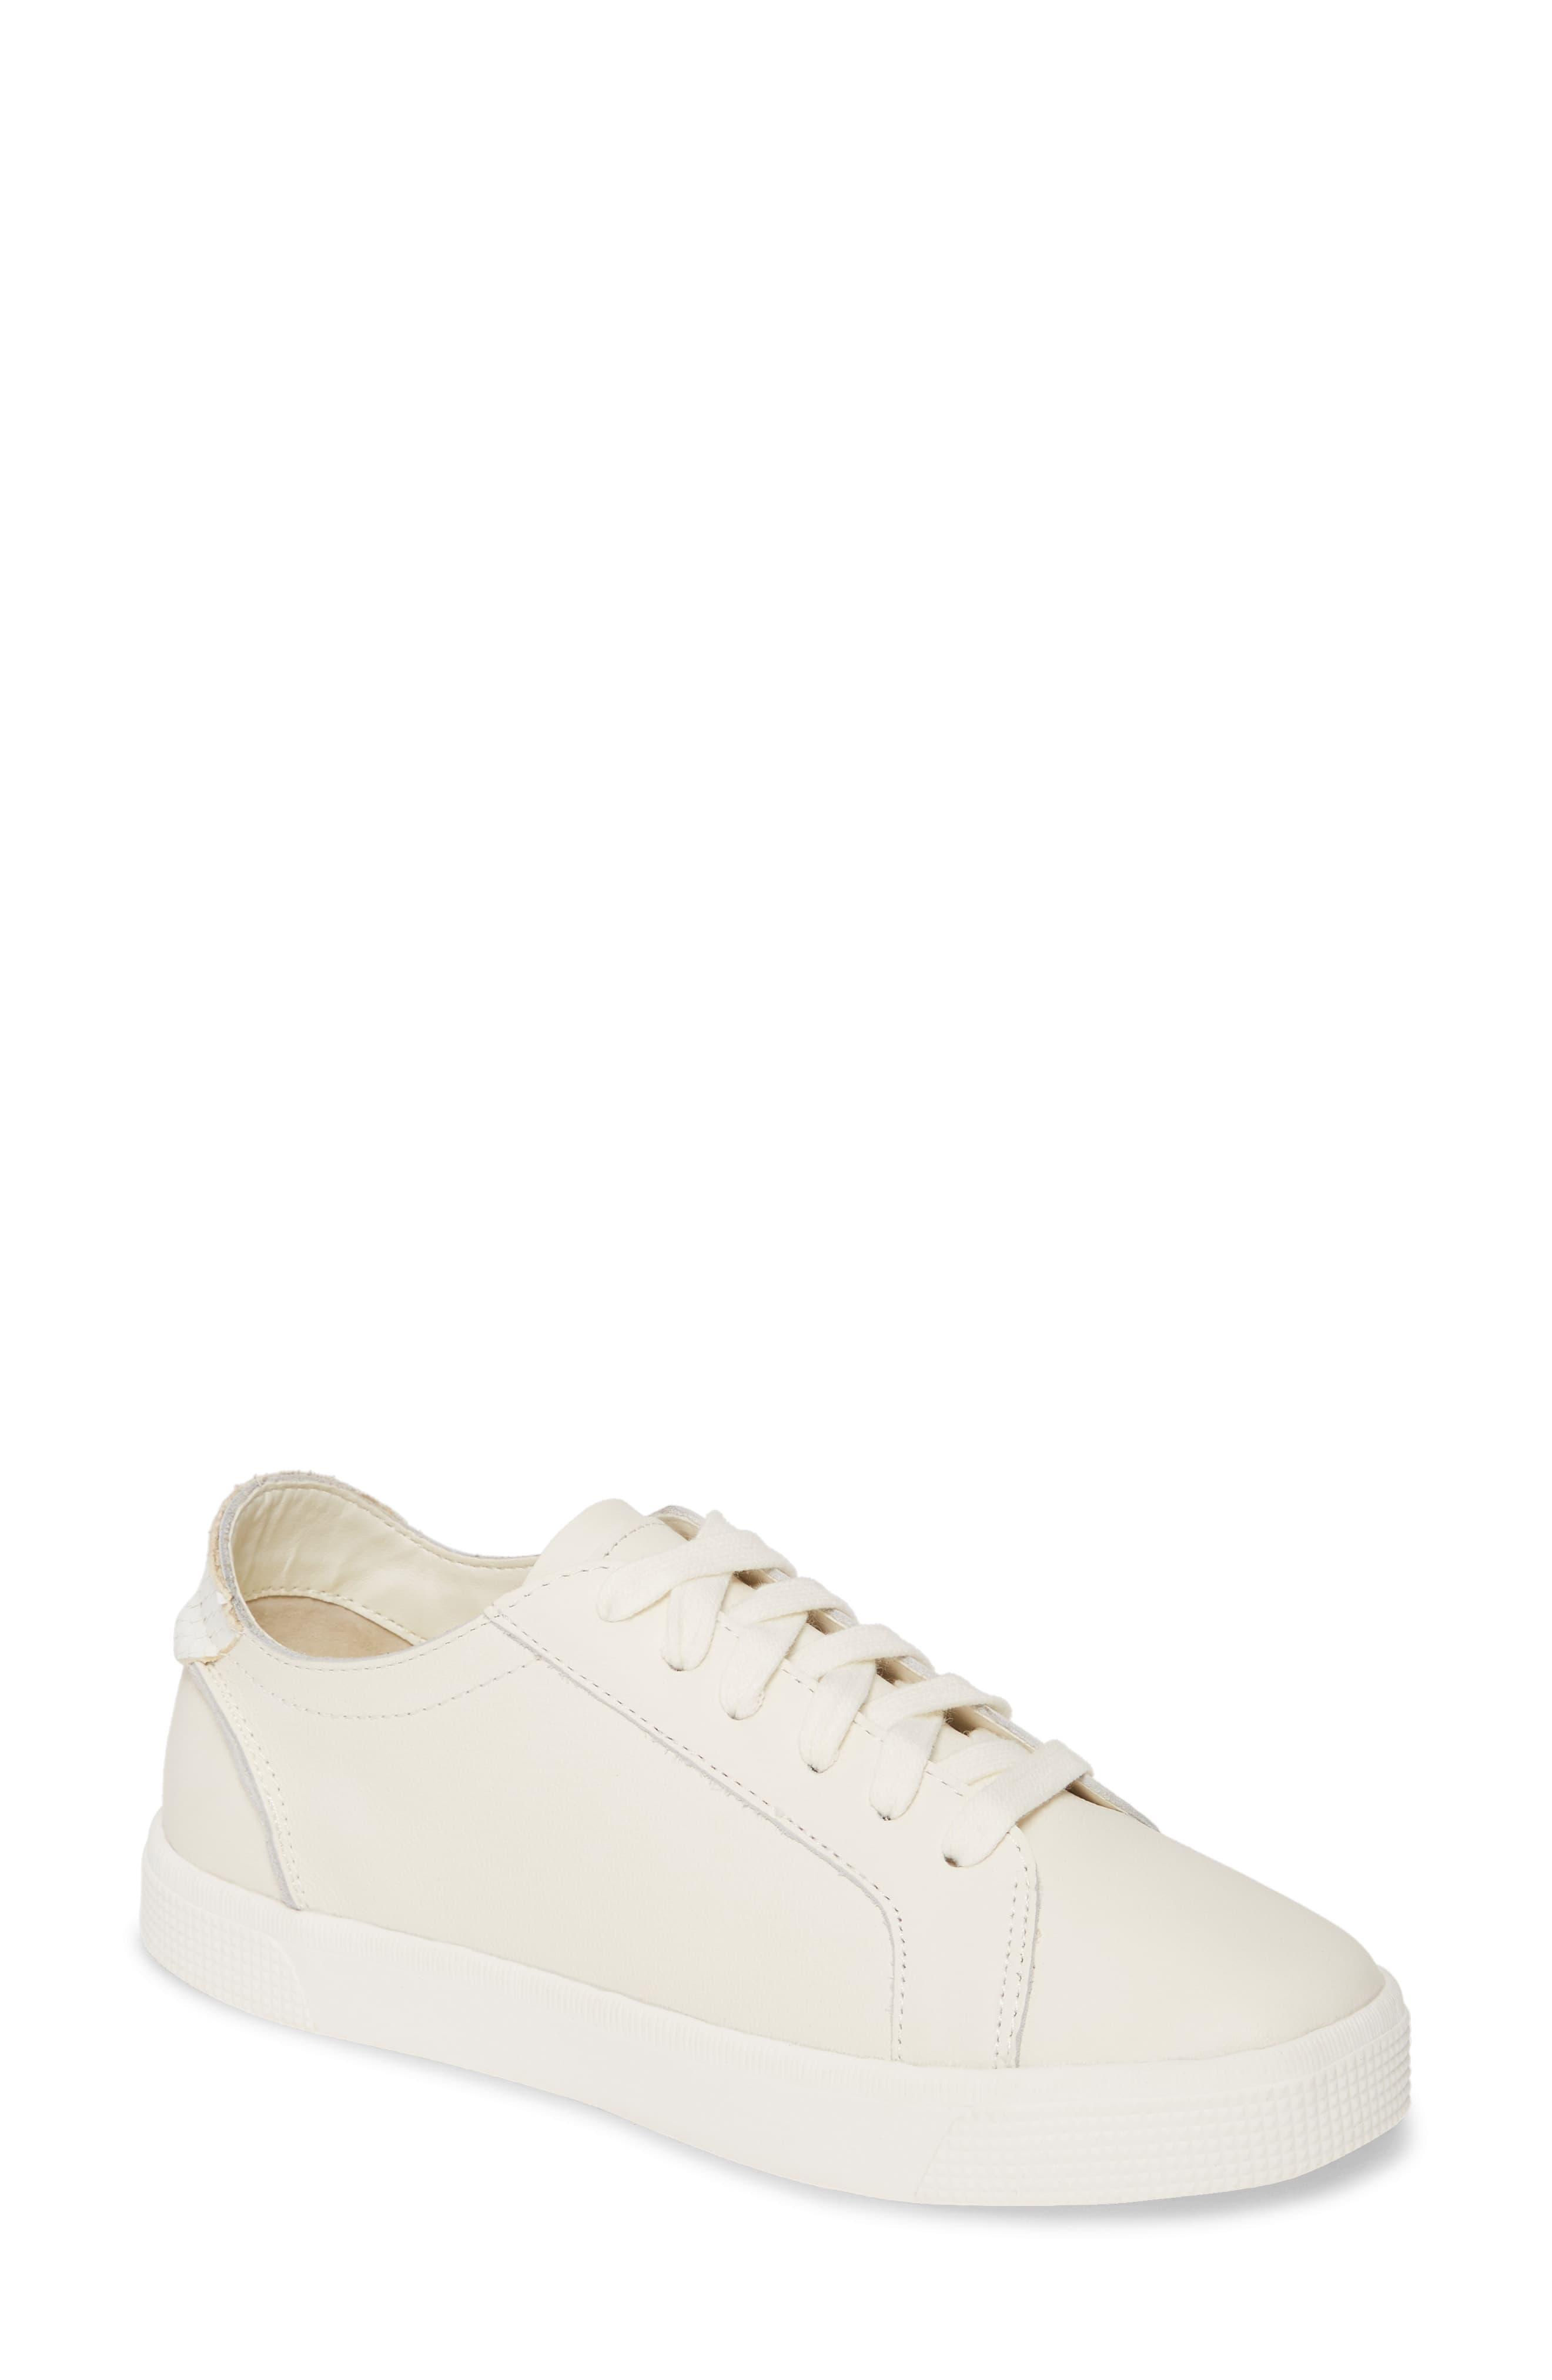 Dolce Vita Leather Zia Sneaker in White Leather (White) - Lyst